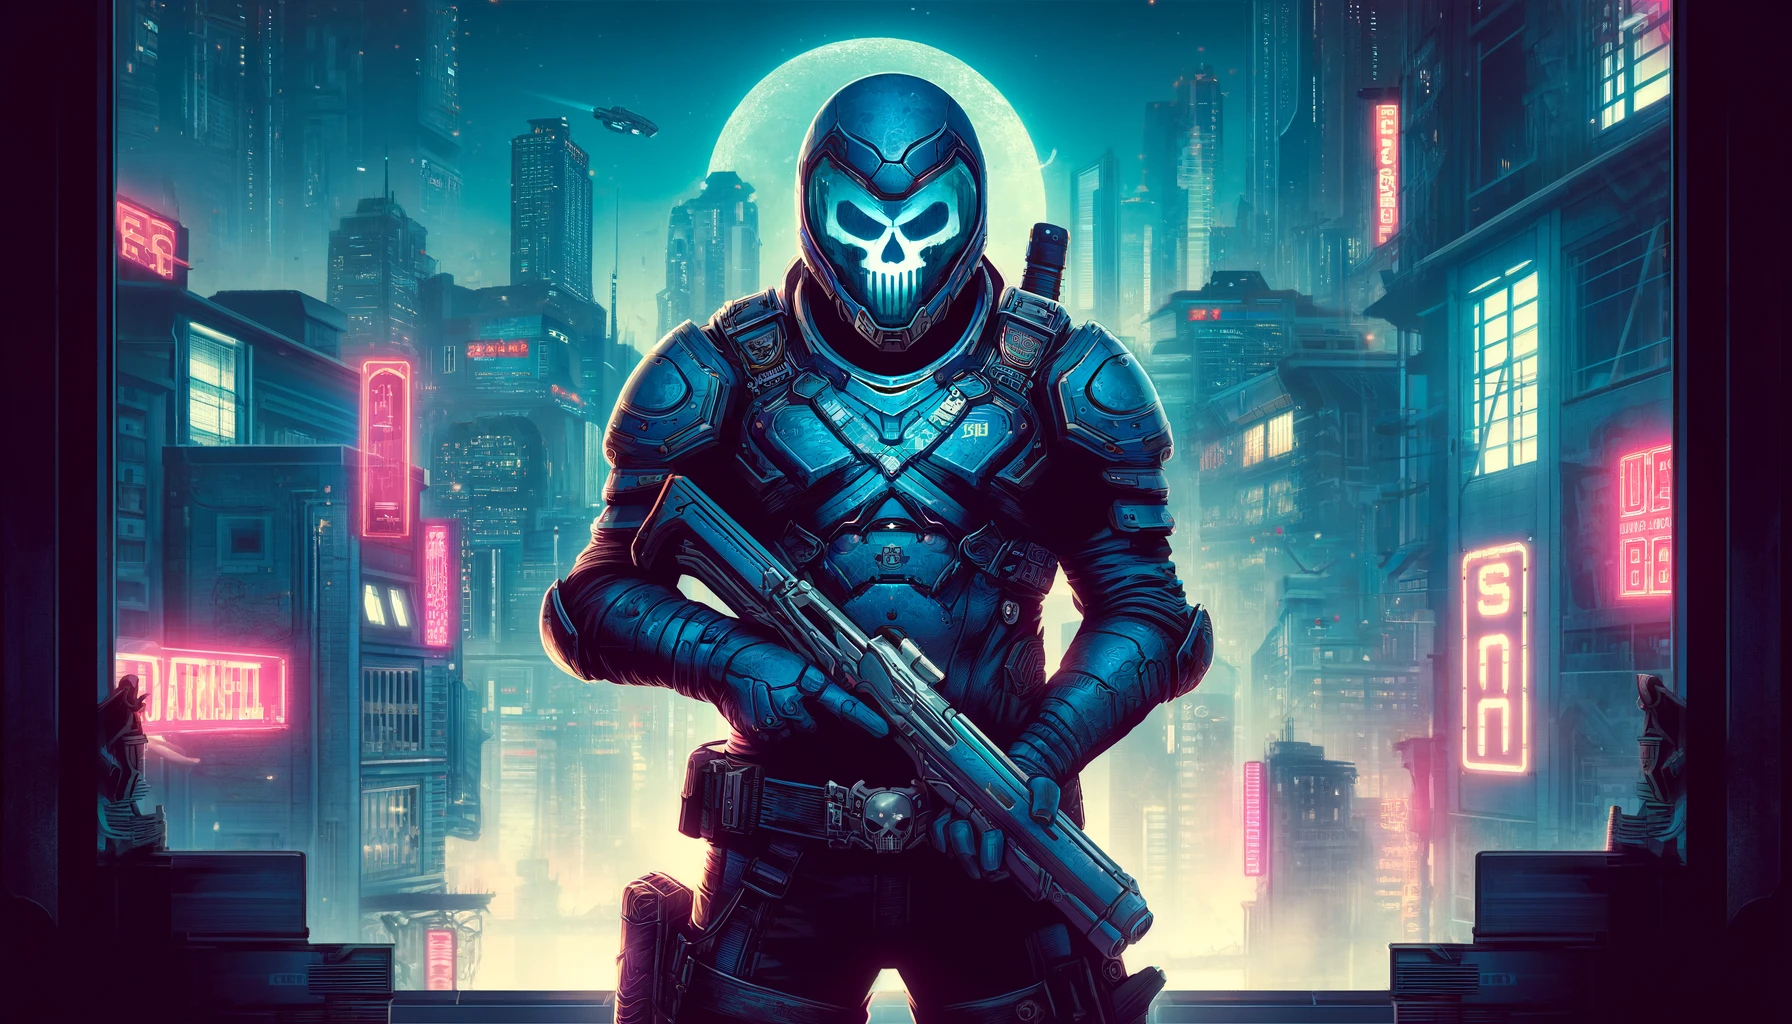 A warrior in combat overalls in a helmet with a skull mask stands against the backdrop of city buildings, controlling the area.